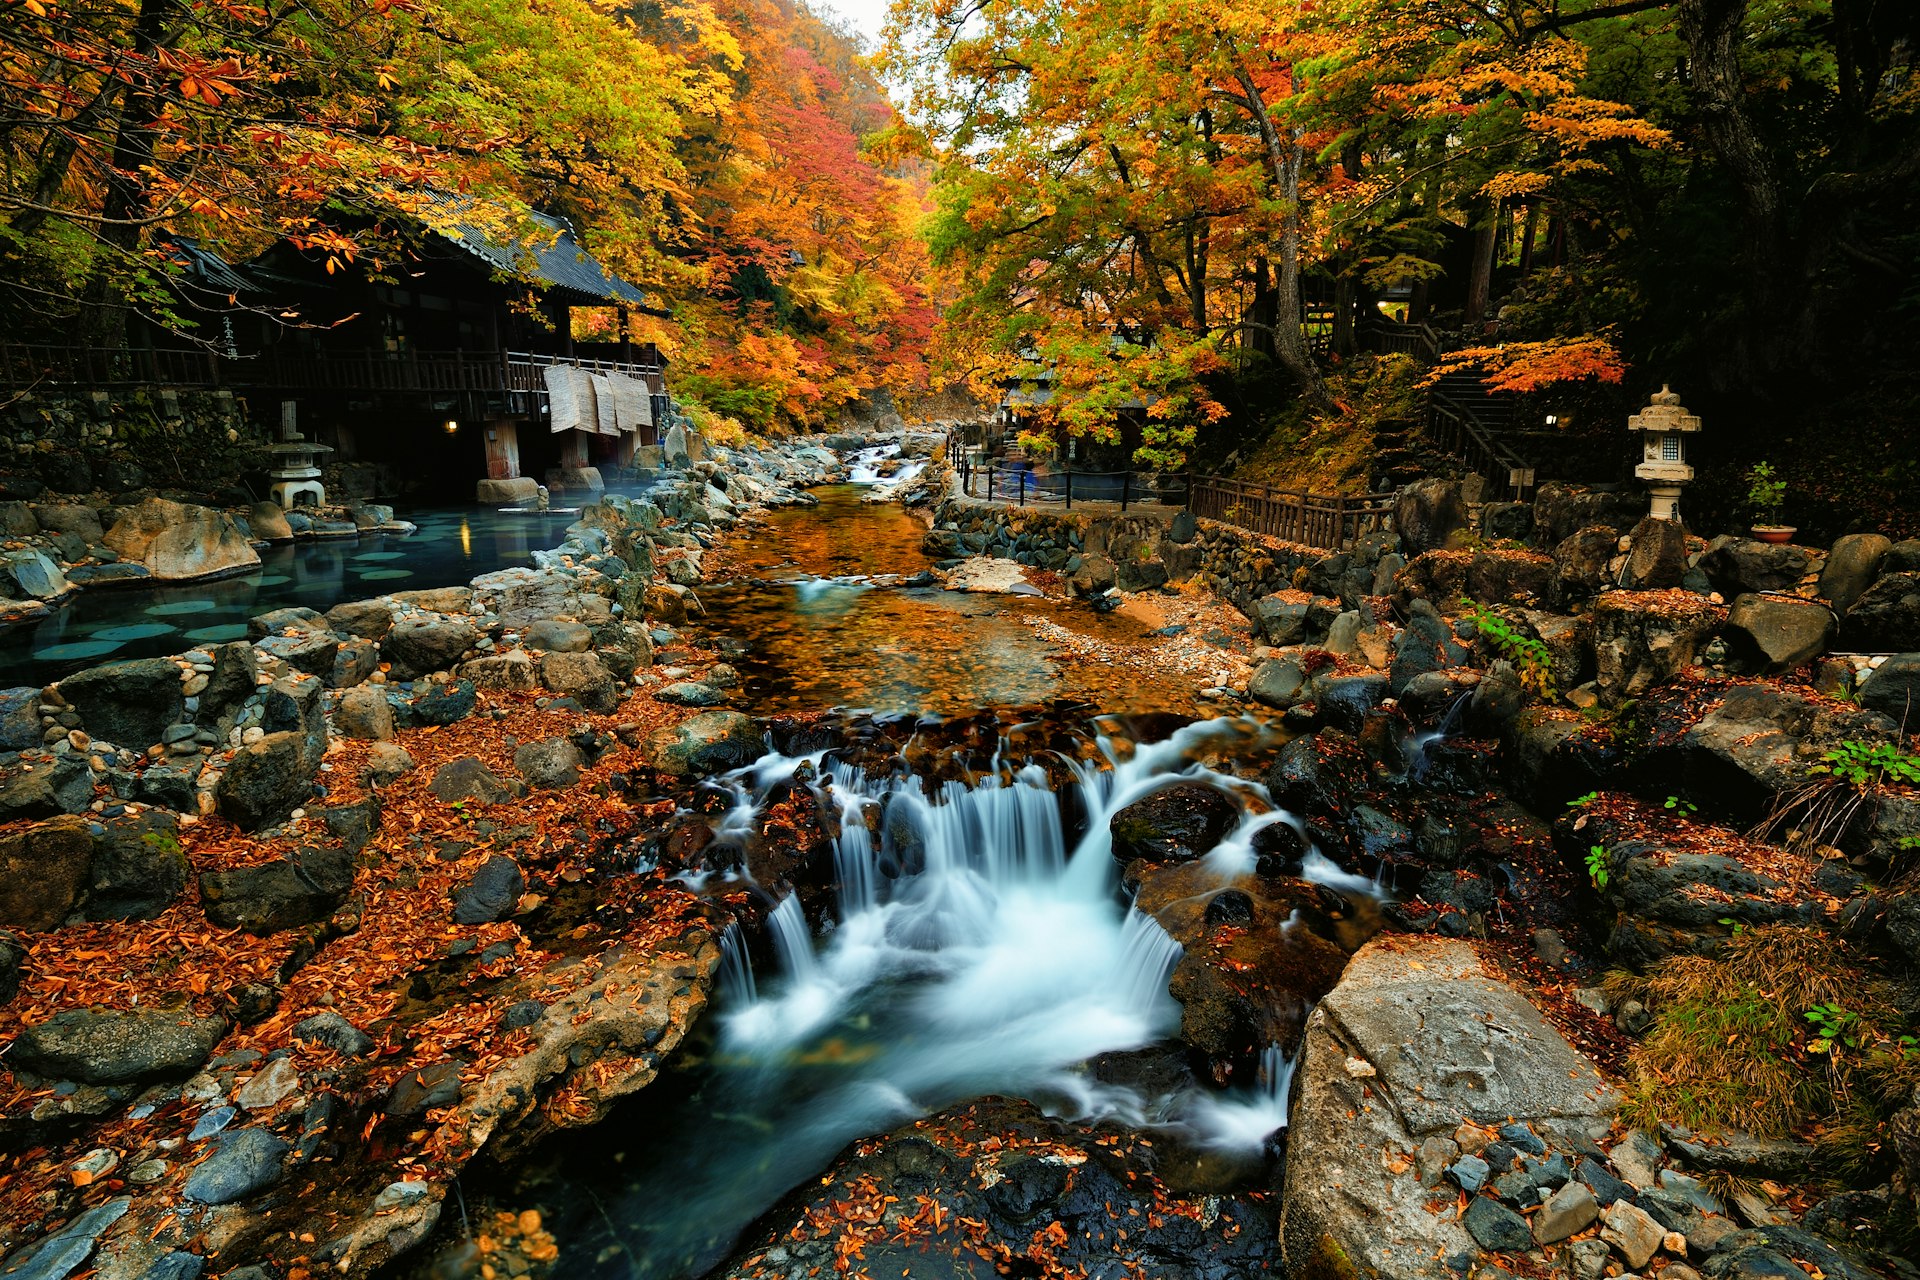 Colorful autumn leaves fill the trees and fallen ones sit on a river above a small waterfall near a hot springs in Japan